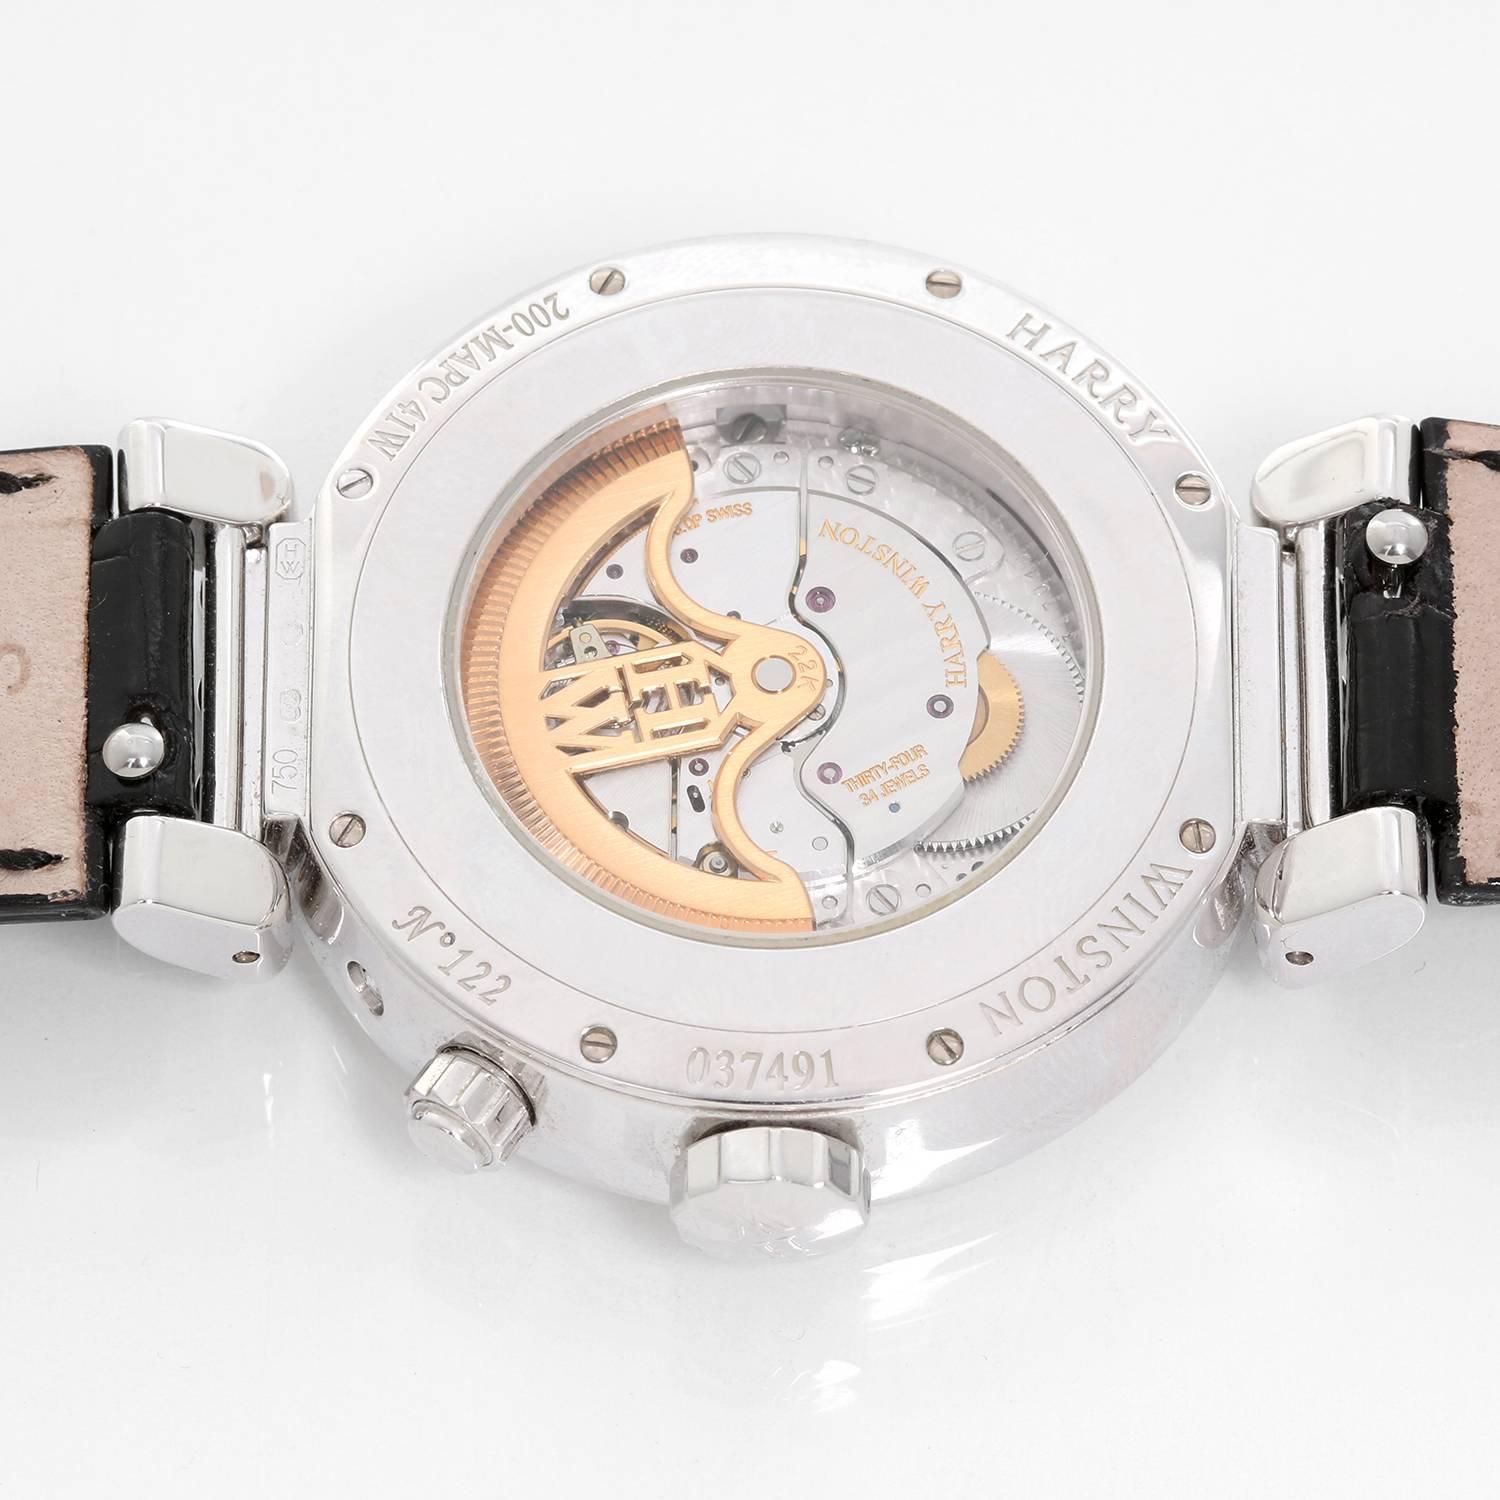 Harry Winston Perpetual Calendar Premier Excenter Watch -  Automatic. 18K White Gold case ( 41 mm ). Dark grey dial; Excentered hours and minutes, second time-zone, perpetual calendar with retrograde date and month, leap year, moon phase indicator.